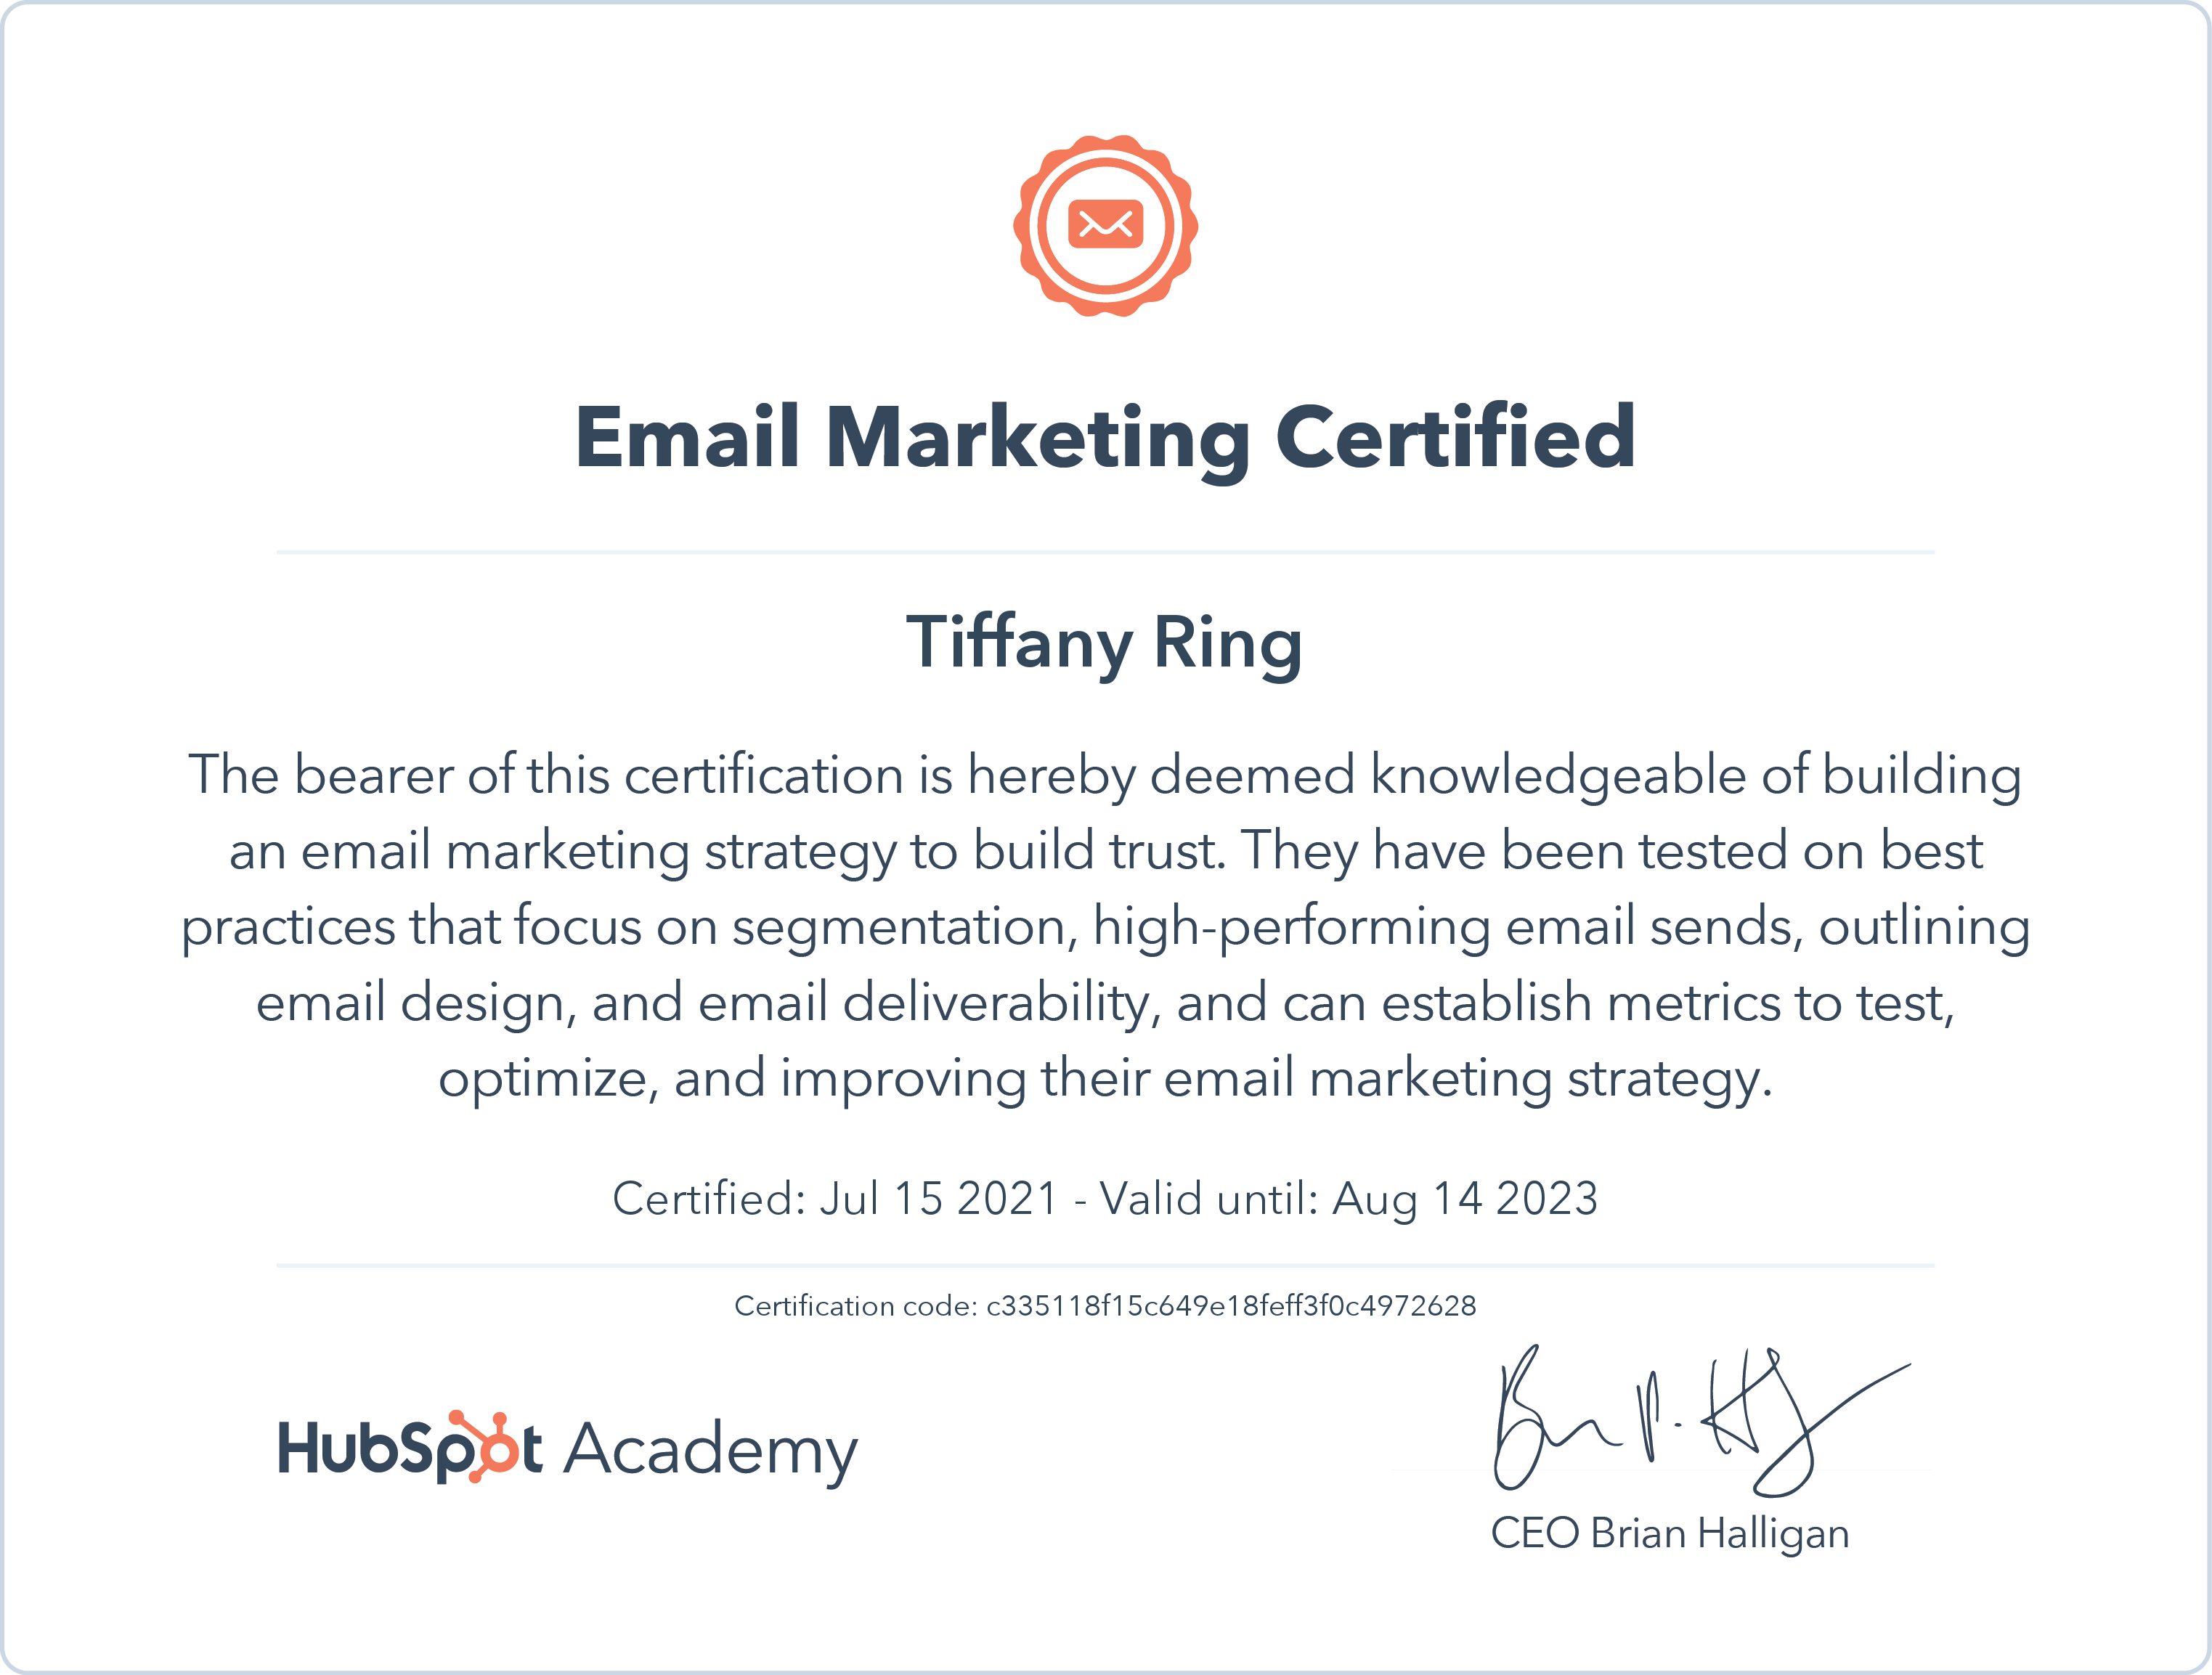 Tiffany Ring Email Marketing Certified